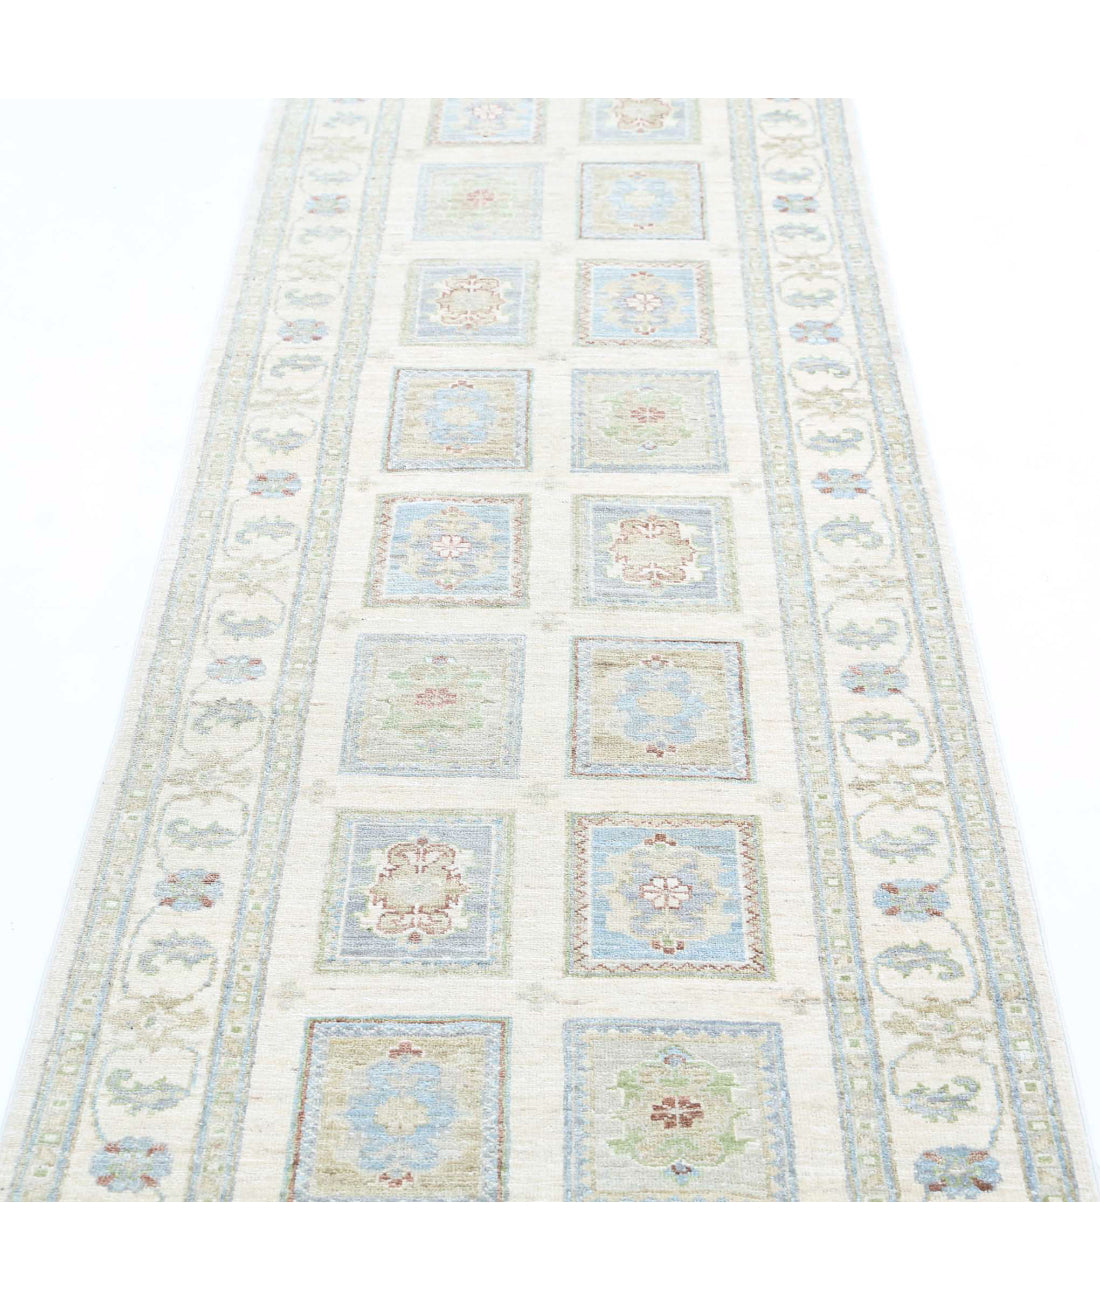 Hand Knotted Serenity Wool Rug - 2'6'' x 7'11'' 2'6'' x 7'11'' (75 X 238) / Ivory / Blue